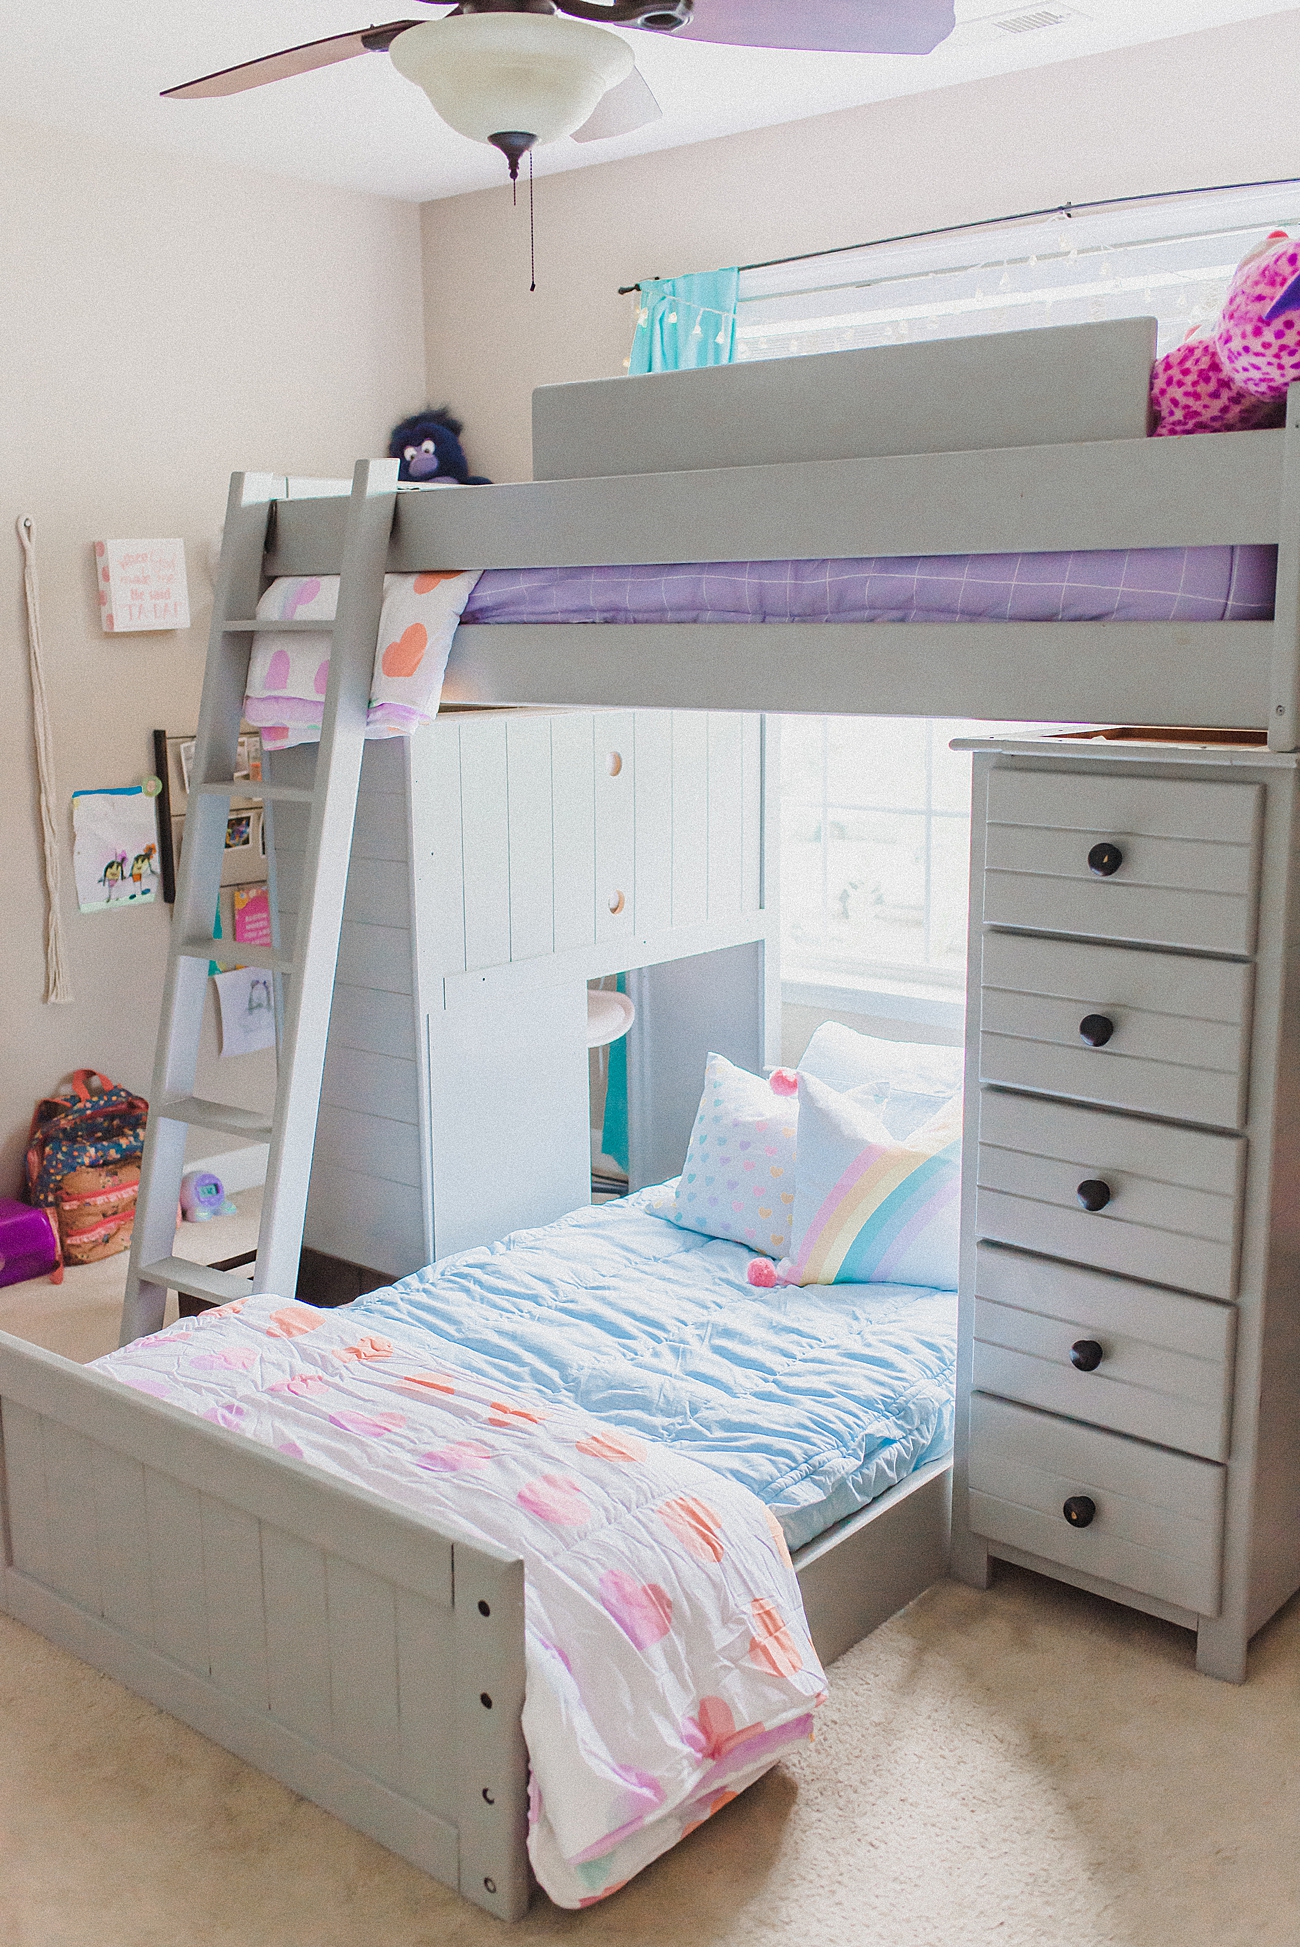 The Best Bedding For Bunk Beds Beddy, Bunk Bed Duvet Covers